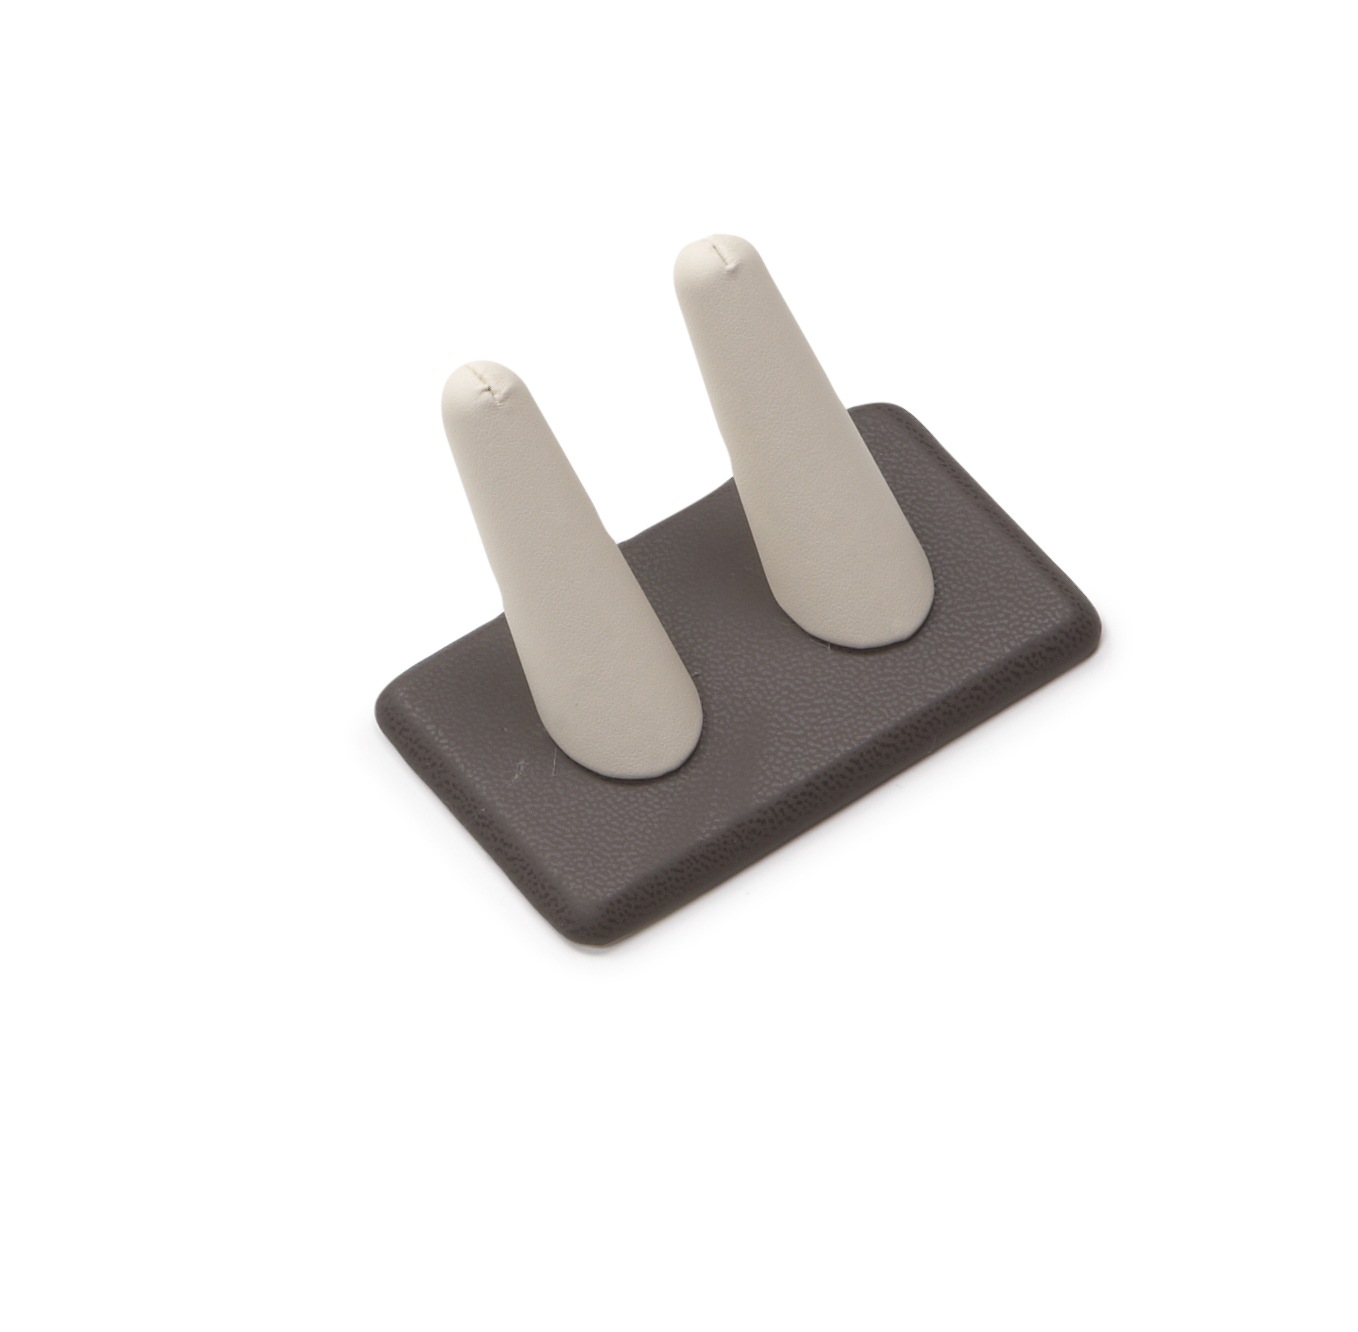 Chocolate/Beige Leatherette 2 Ring Finger